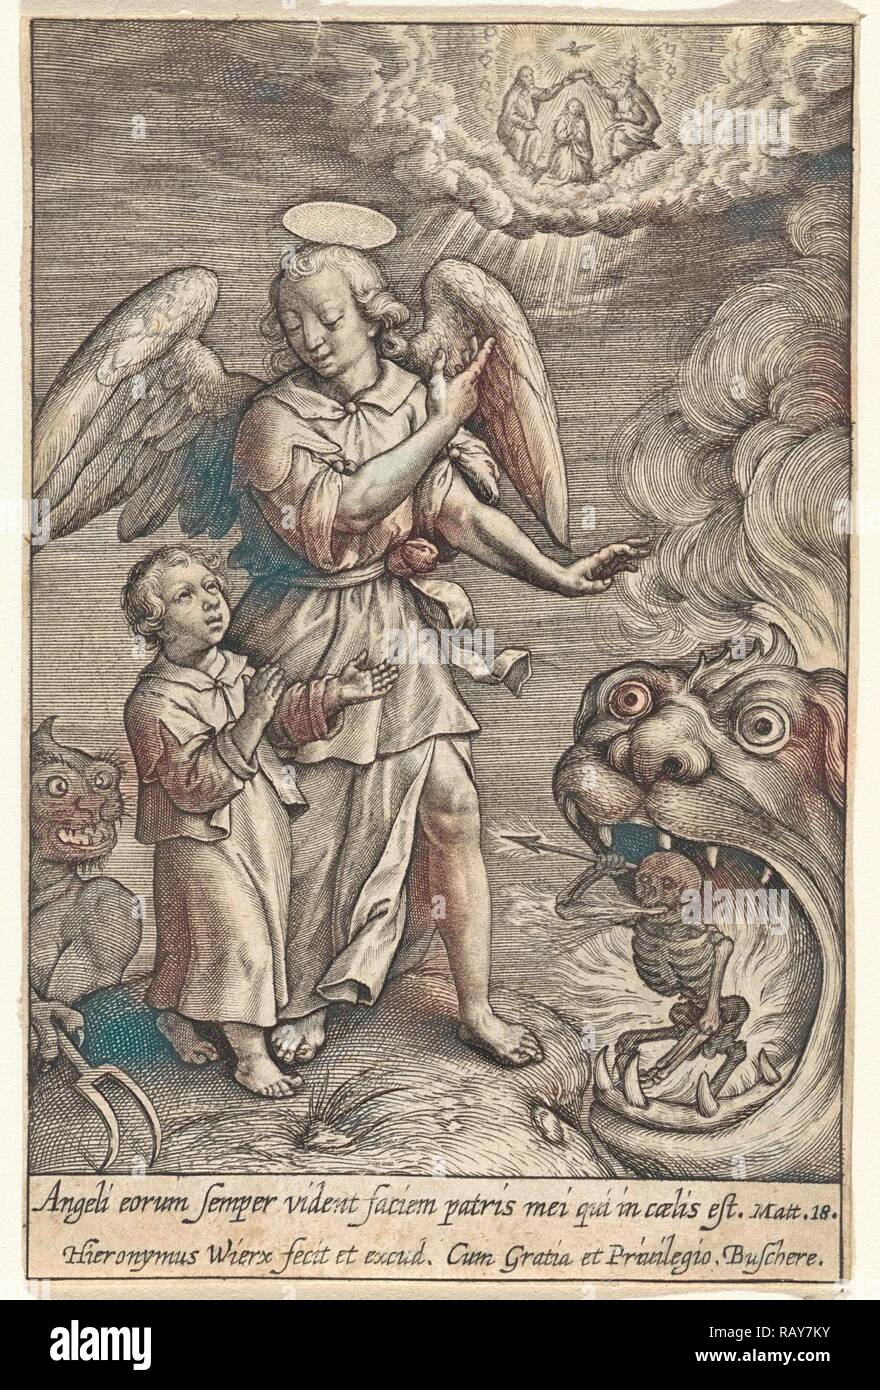 Child with guardian angel, Hieronymus Wierix, 1563. Reimagined by Gibon. Classic art with a modern twist reimagined Stock Photo